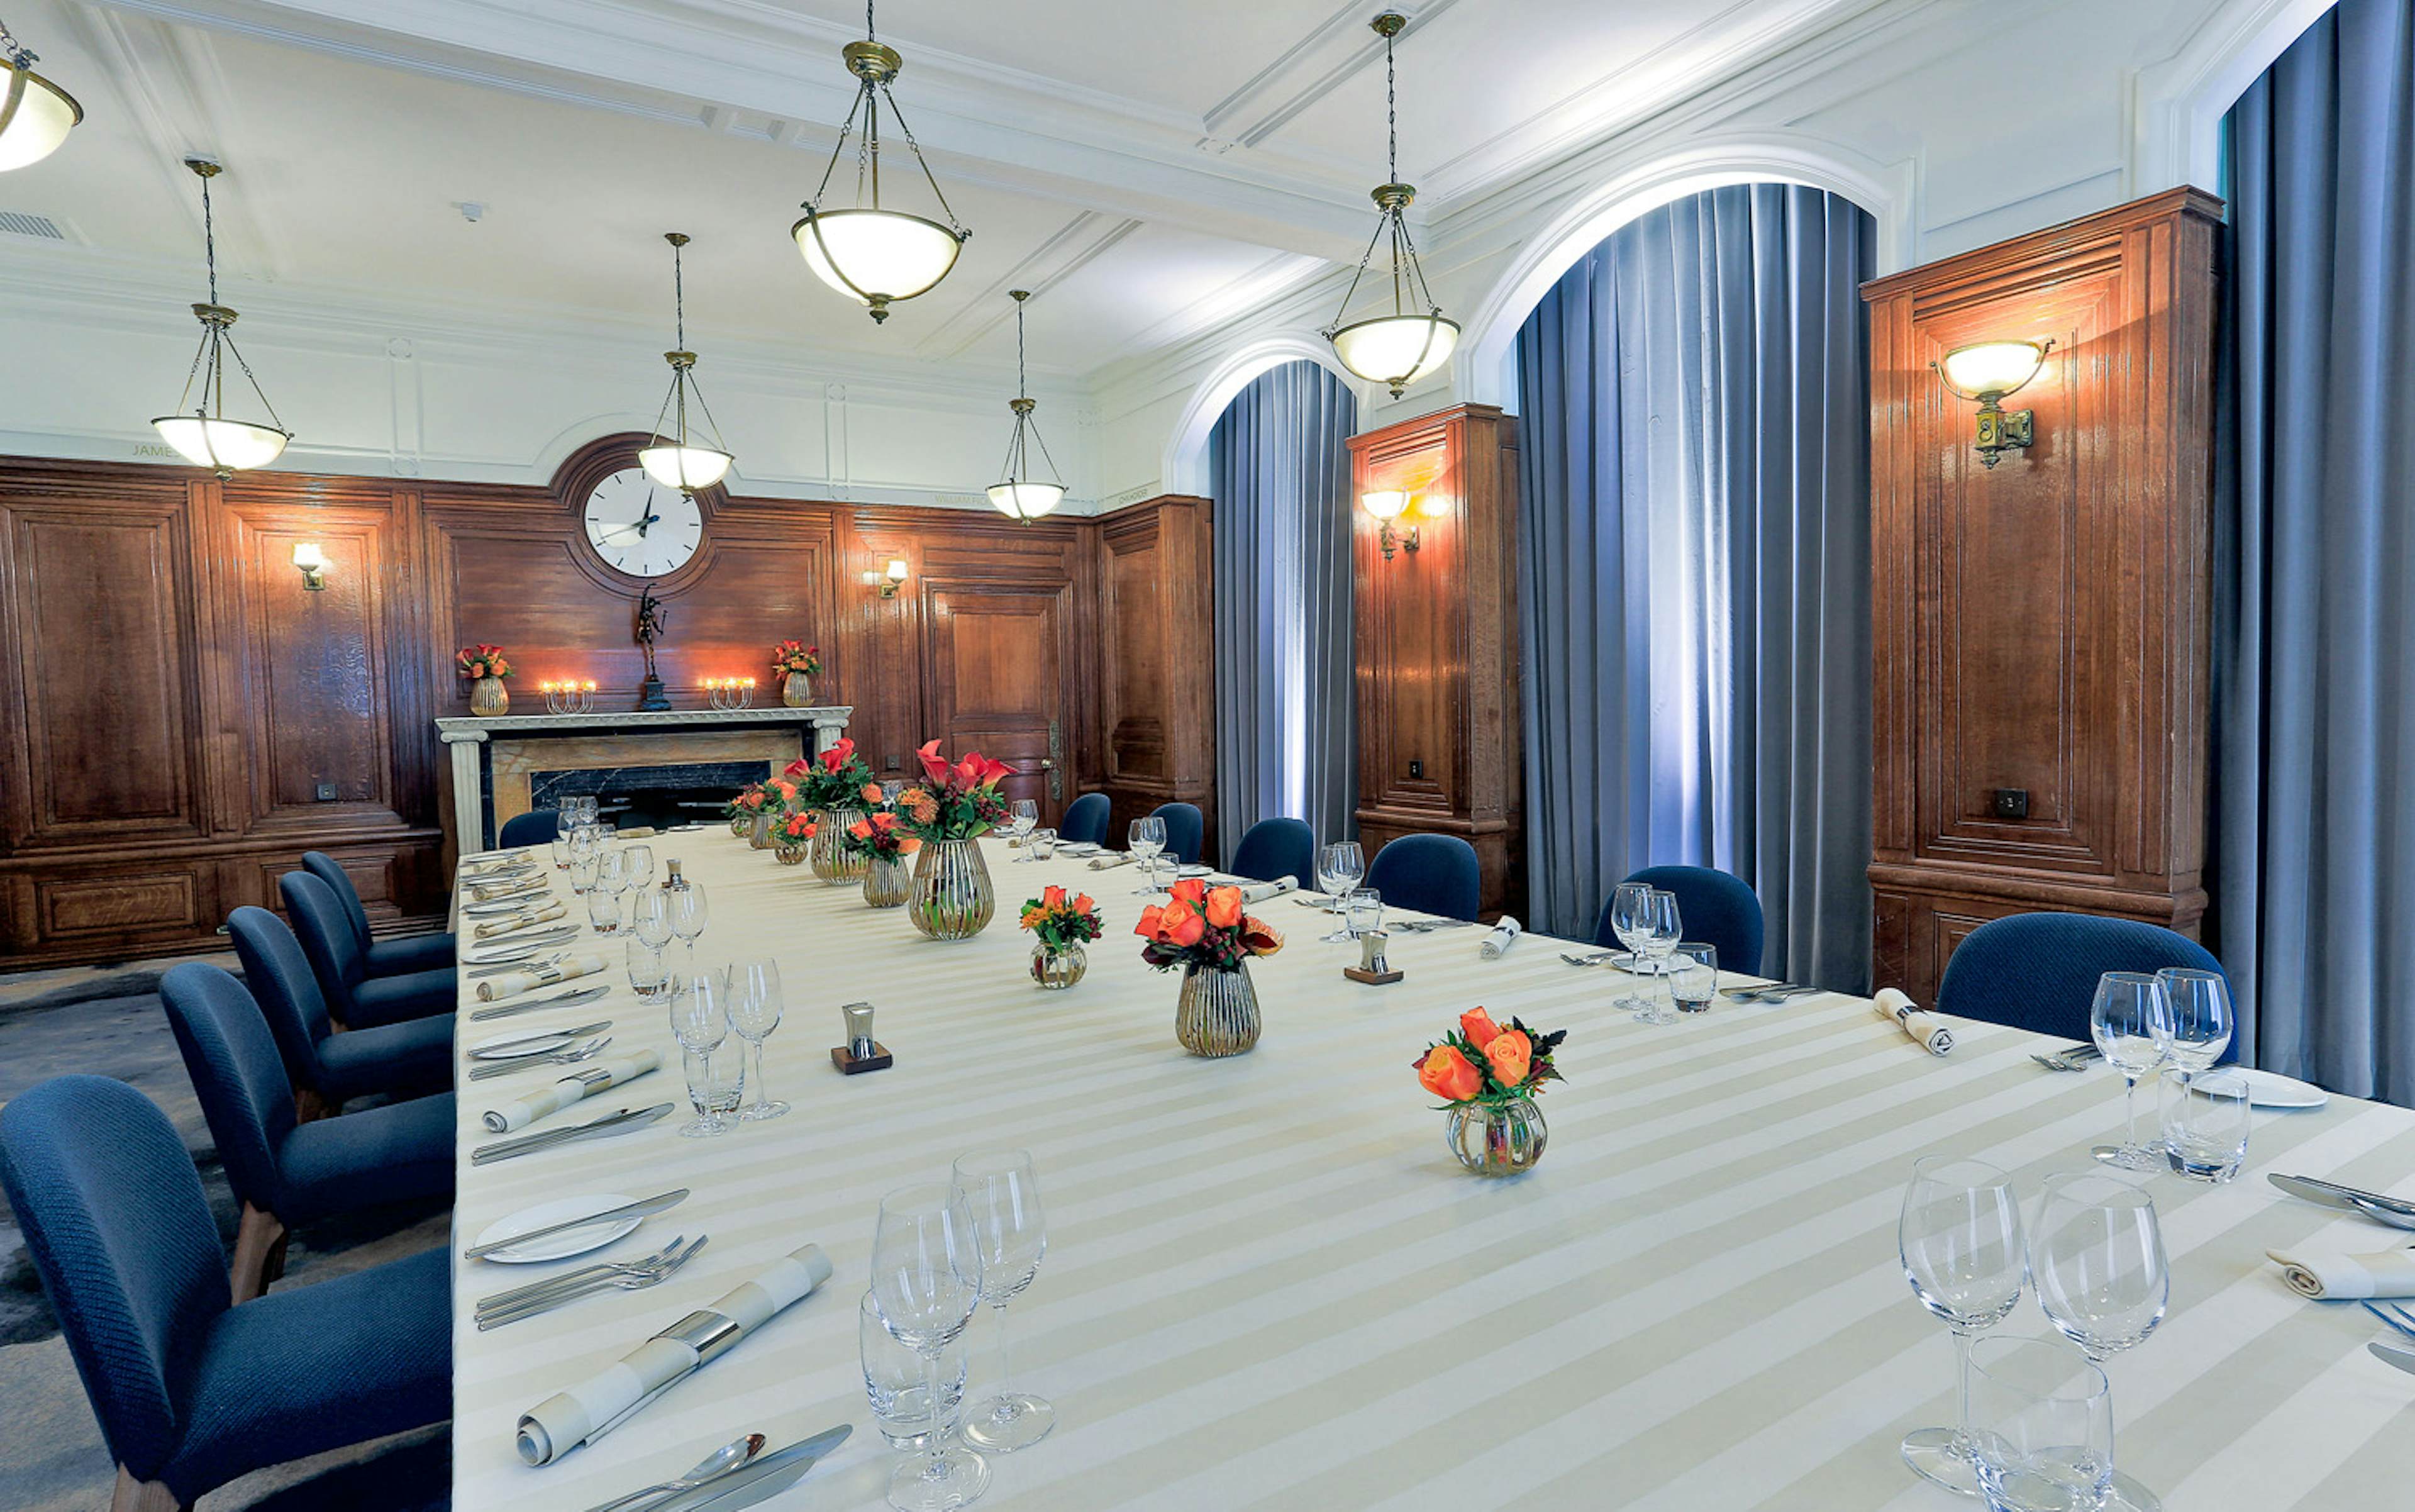 30 Euston Square - The Heritage Rooms image 1